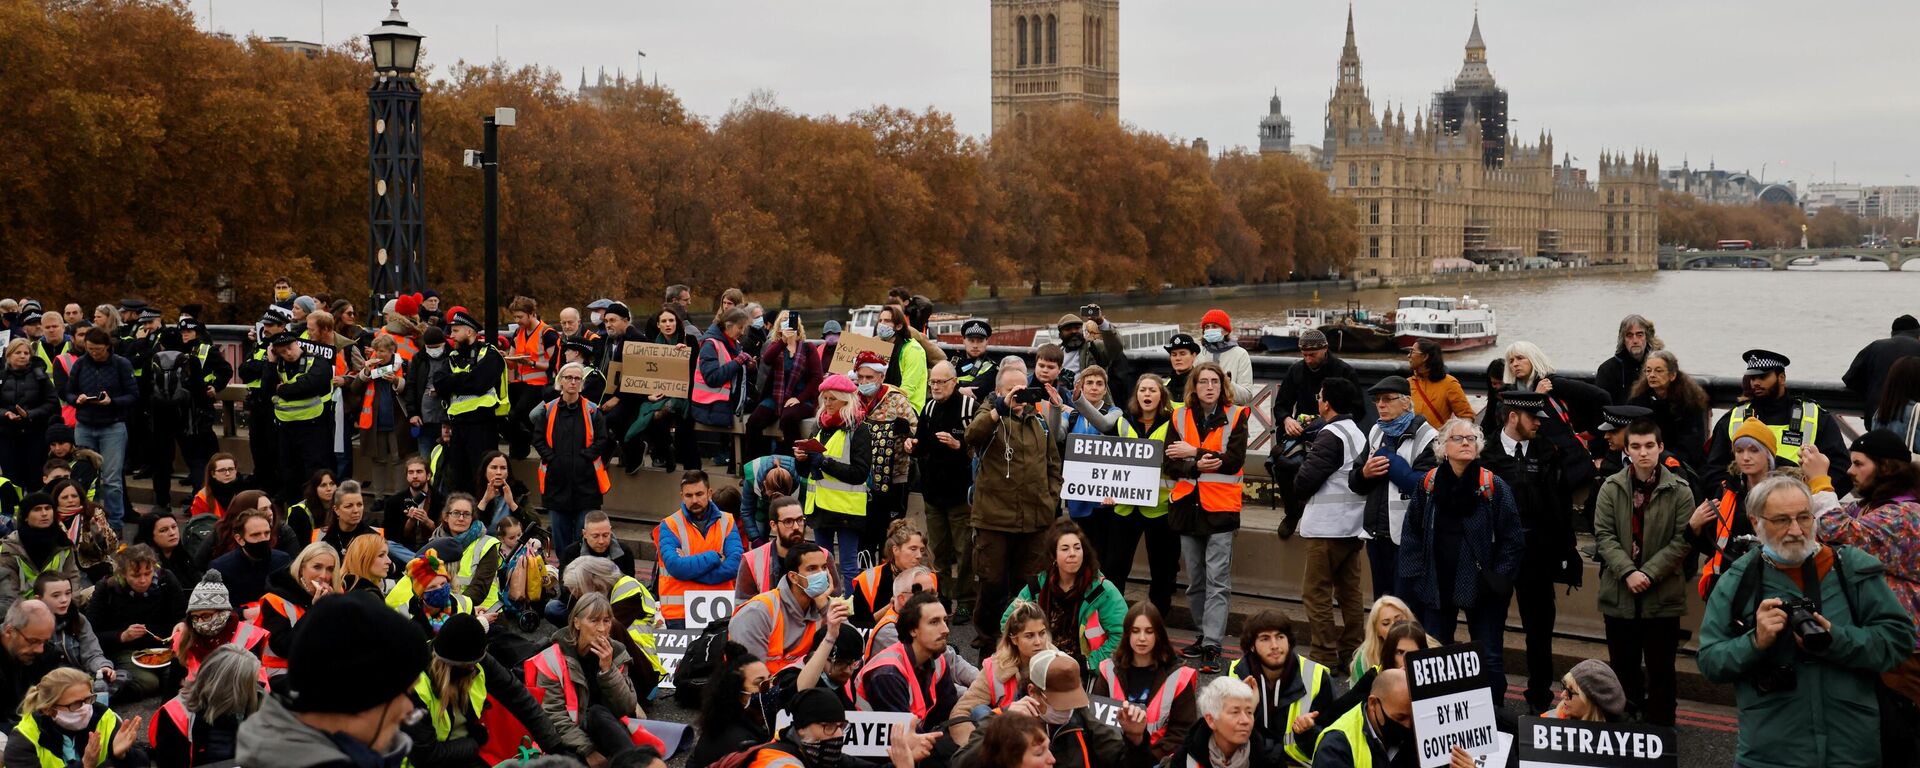 Climate change activists block traffic during a protest action in solidarity with activists from the Insulate Britain group who received prison terms for blocking roads, on Lambeth Bridge in central London on November 20, 2021.  - Sputnik International, 1920, 29.12.2021